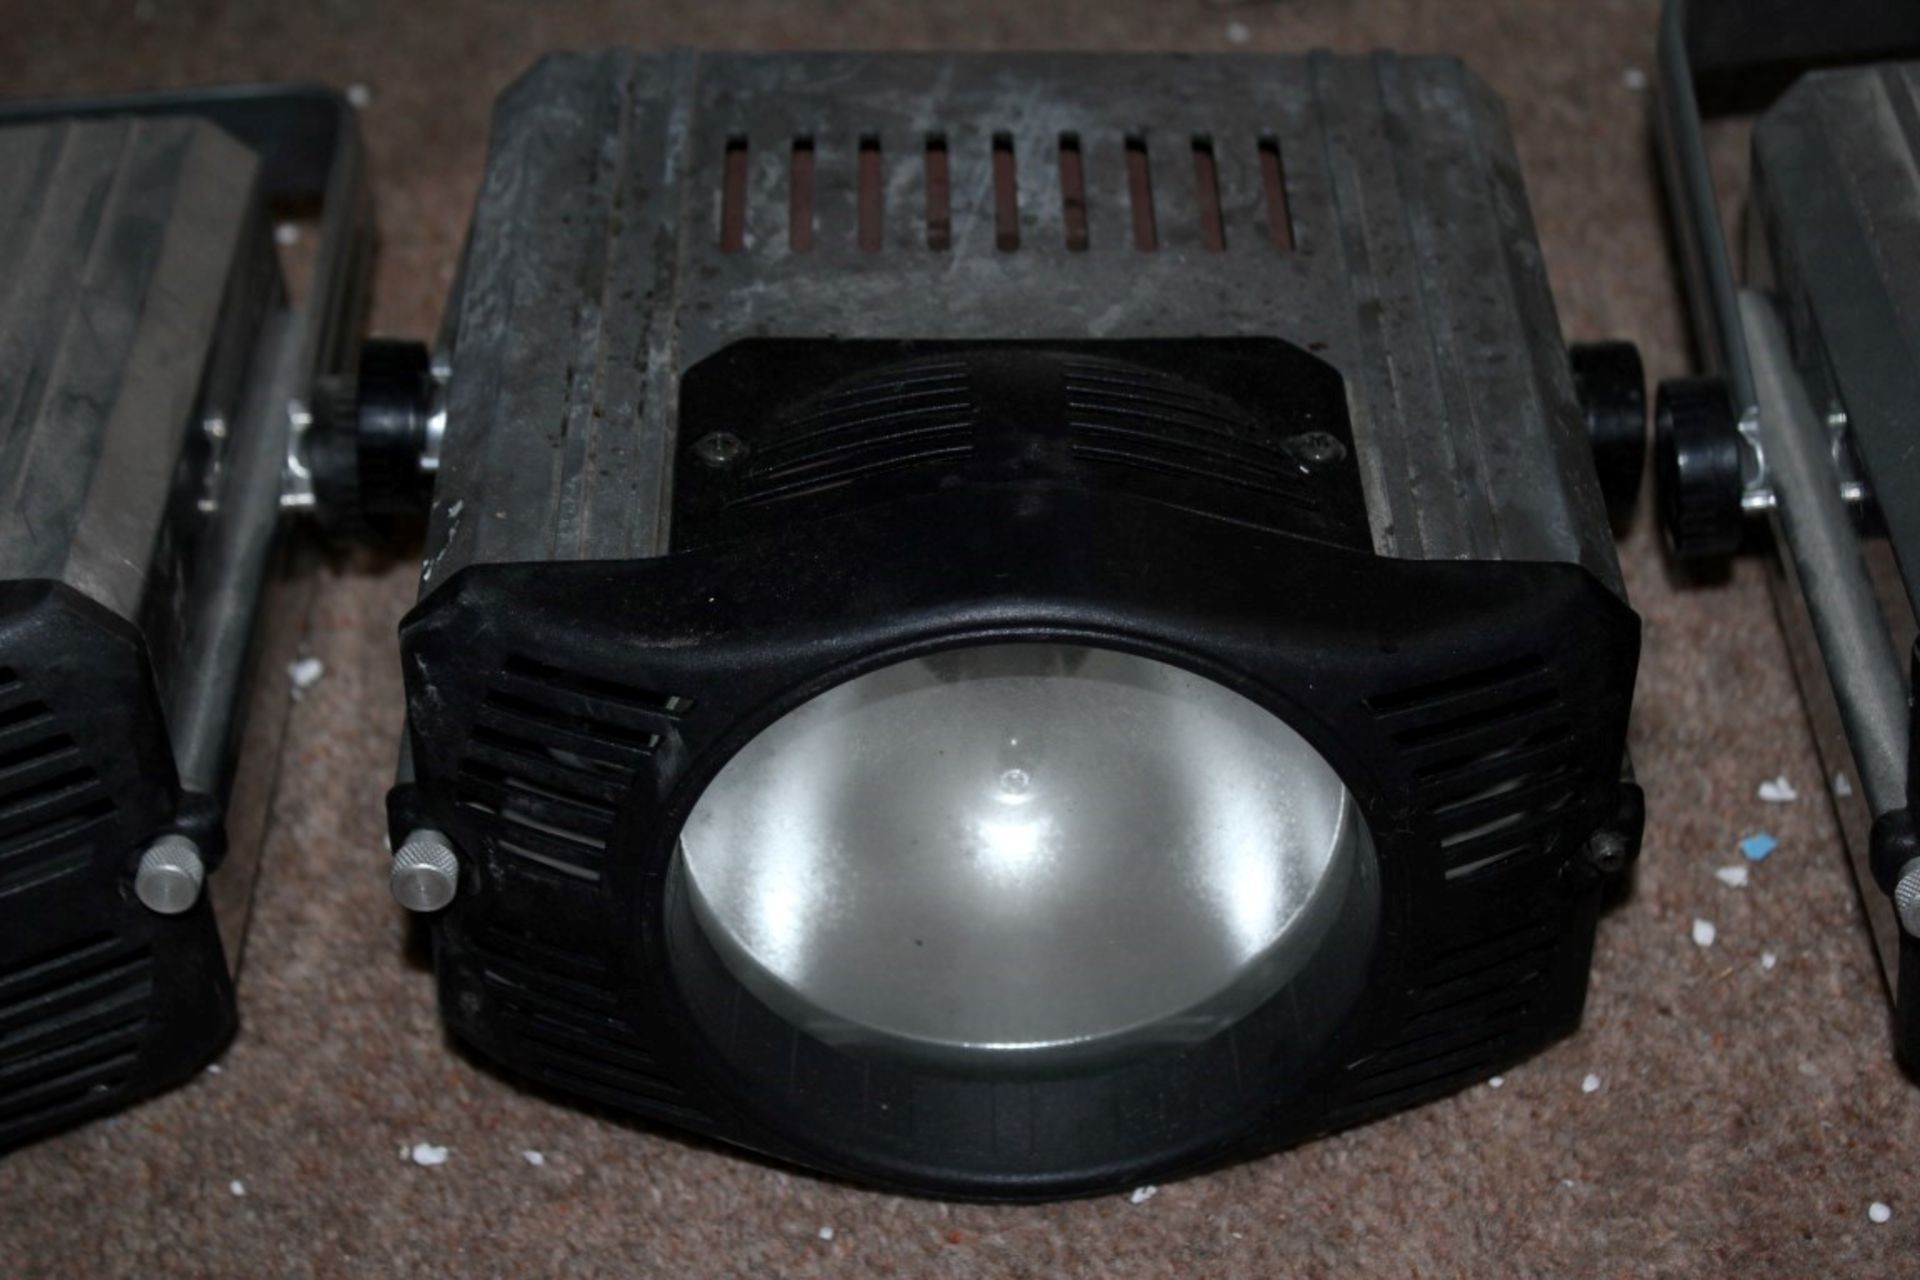 1 x Lival Power 70T 70w Spot Lights - Night Club Disco Stage Lighting - Untested - CL090 - Ref BL183 - Image 3 of 3